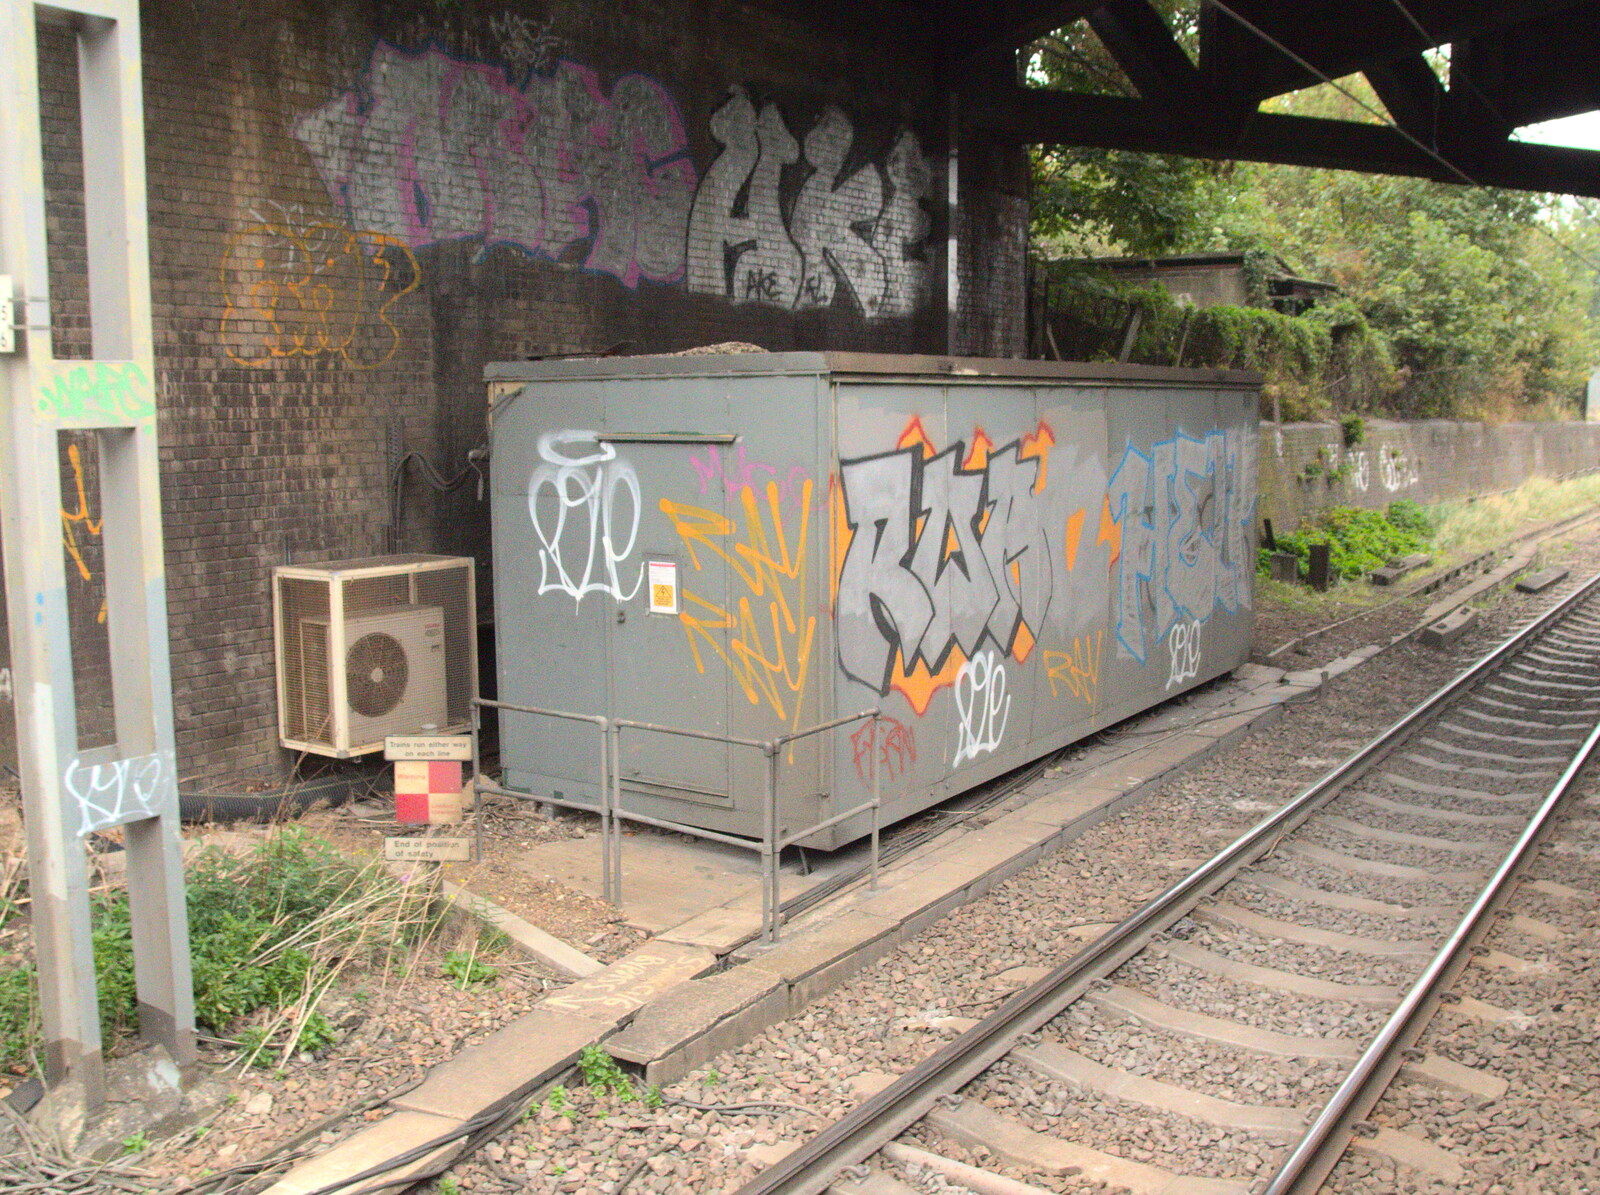 Hard-to-catch under-the-bridge graffiti from Bike Rides and the BSCC at the Railway, Mellis and Brome, Suffolk - 18th September 2014